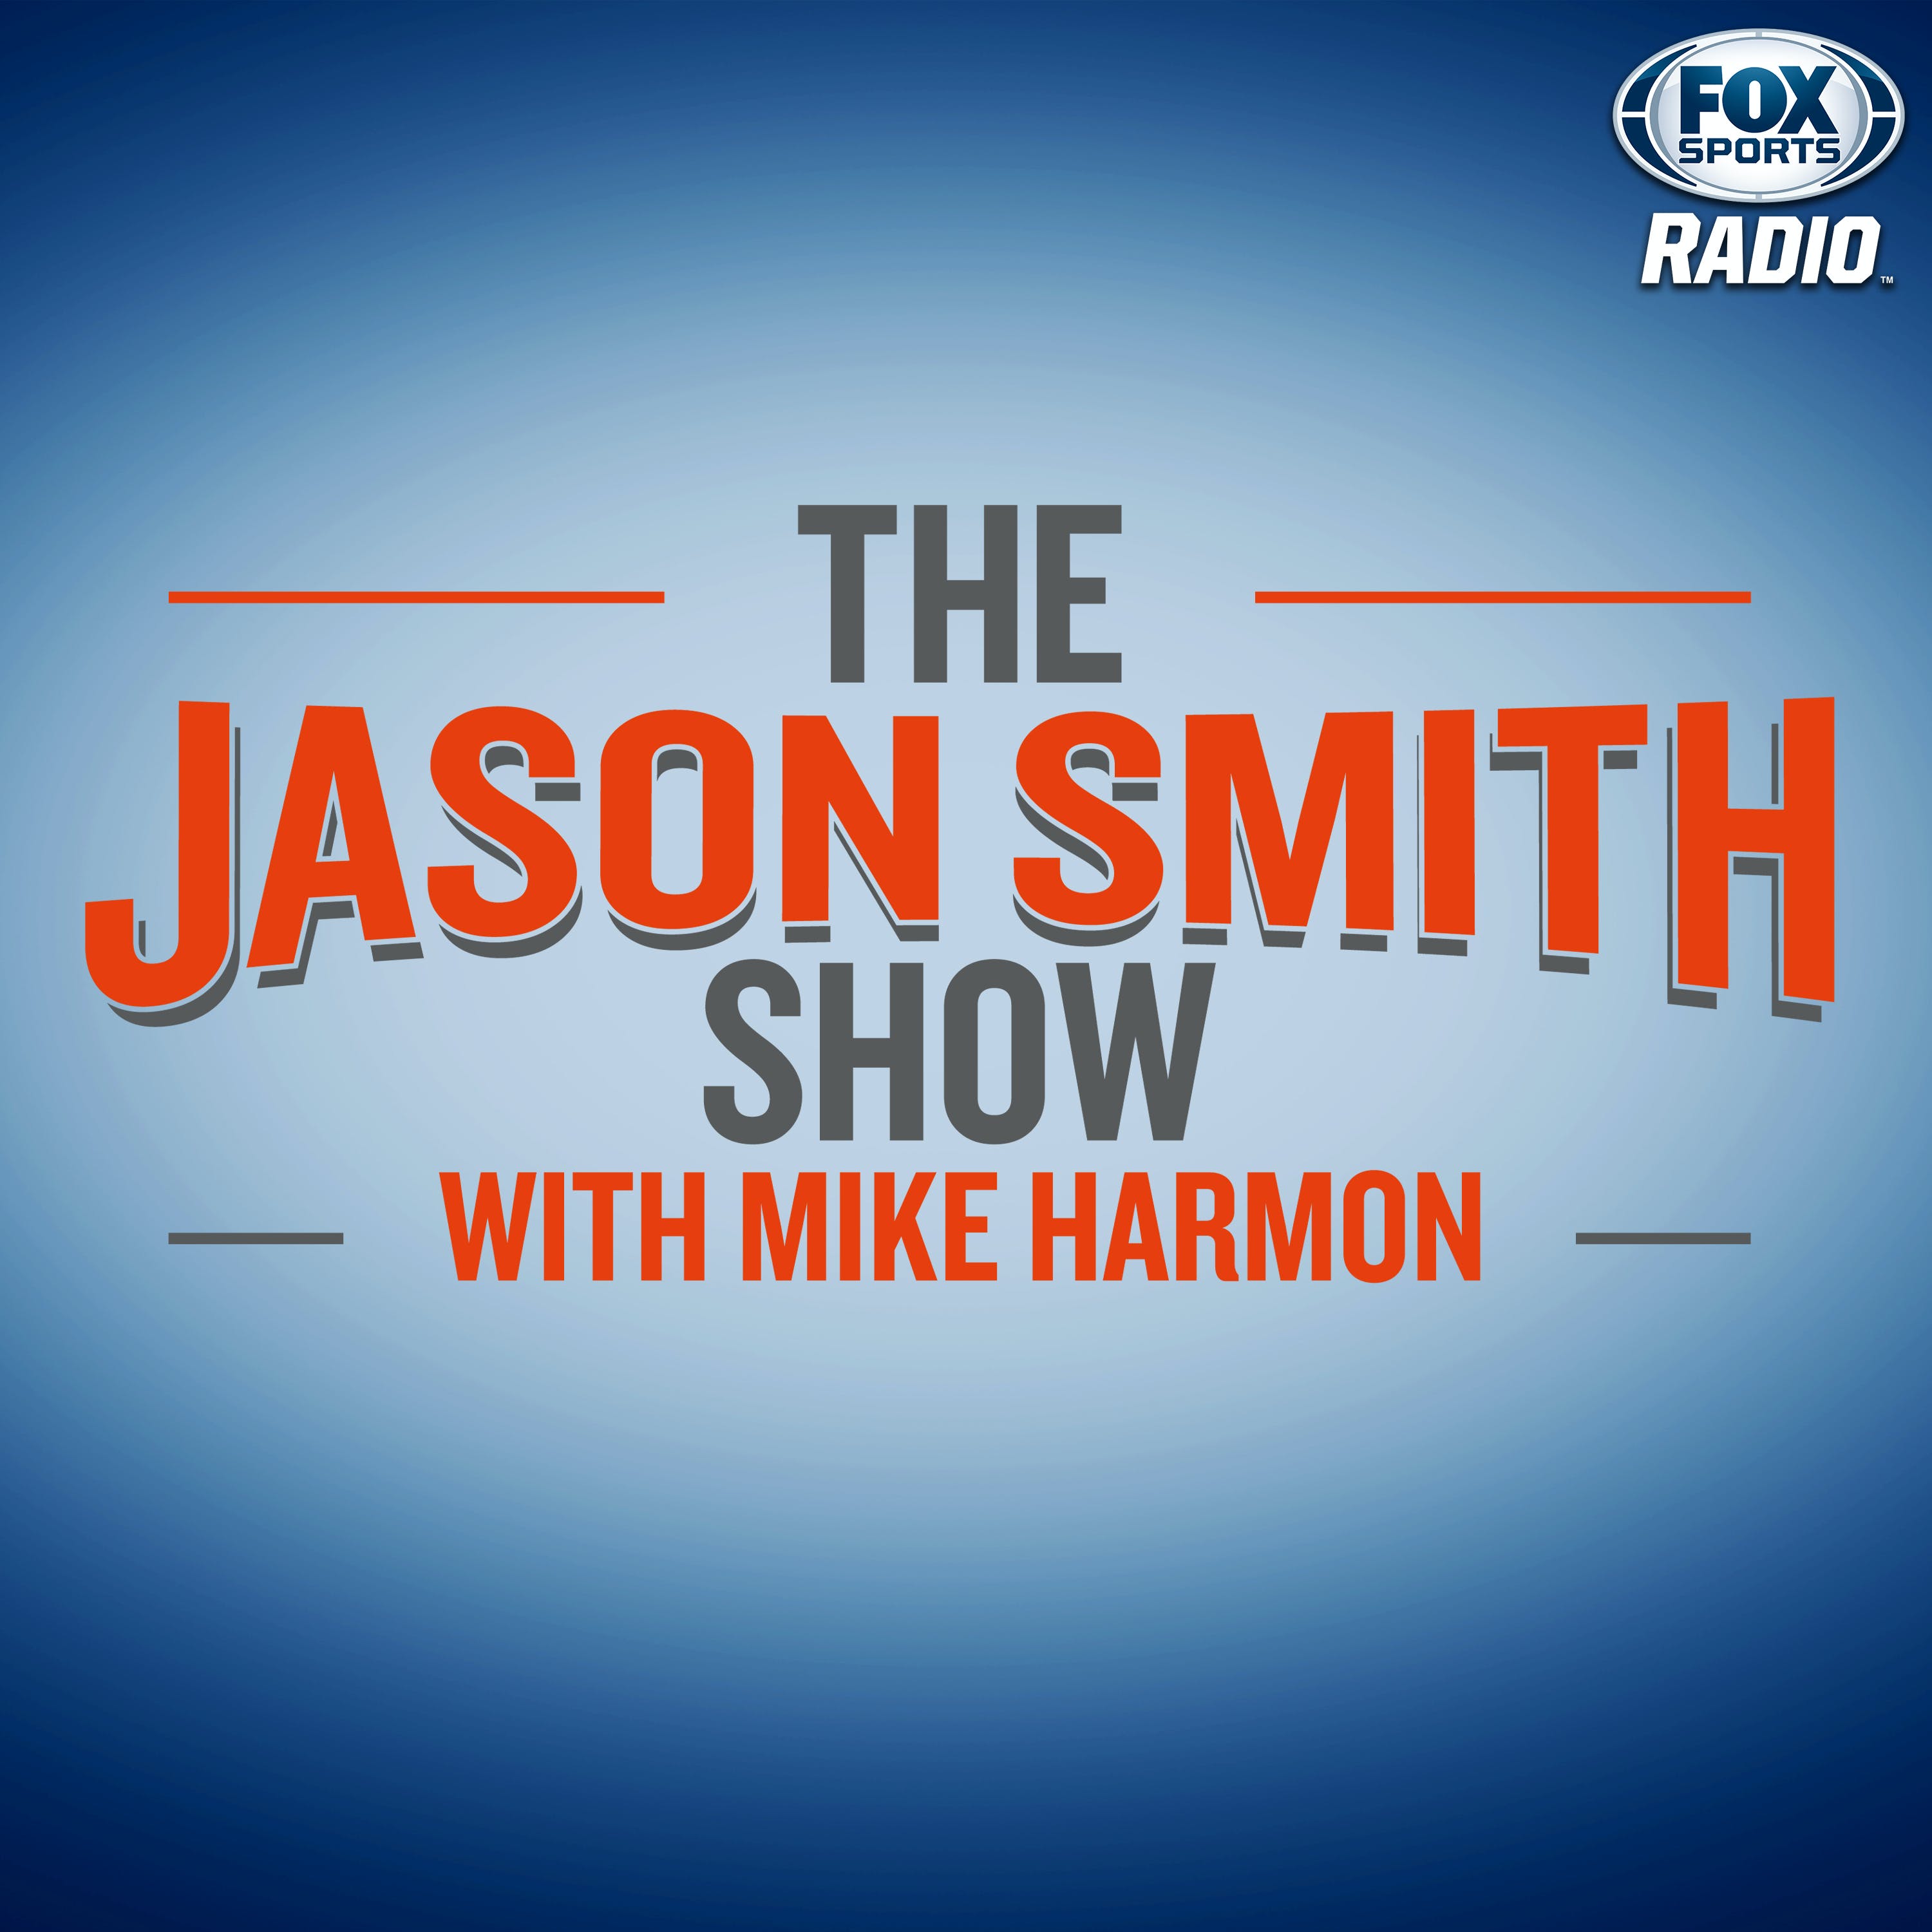 07/21/2021 - Best Of The Jason Smith Show with Mike Harmon